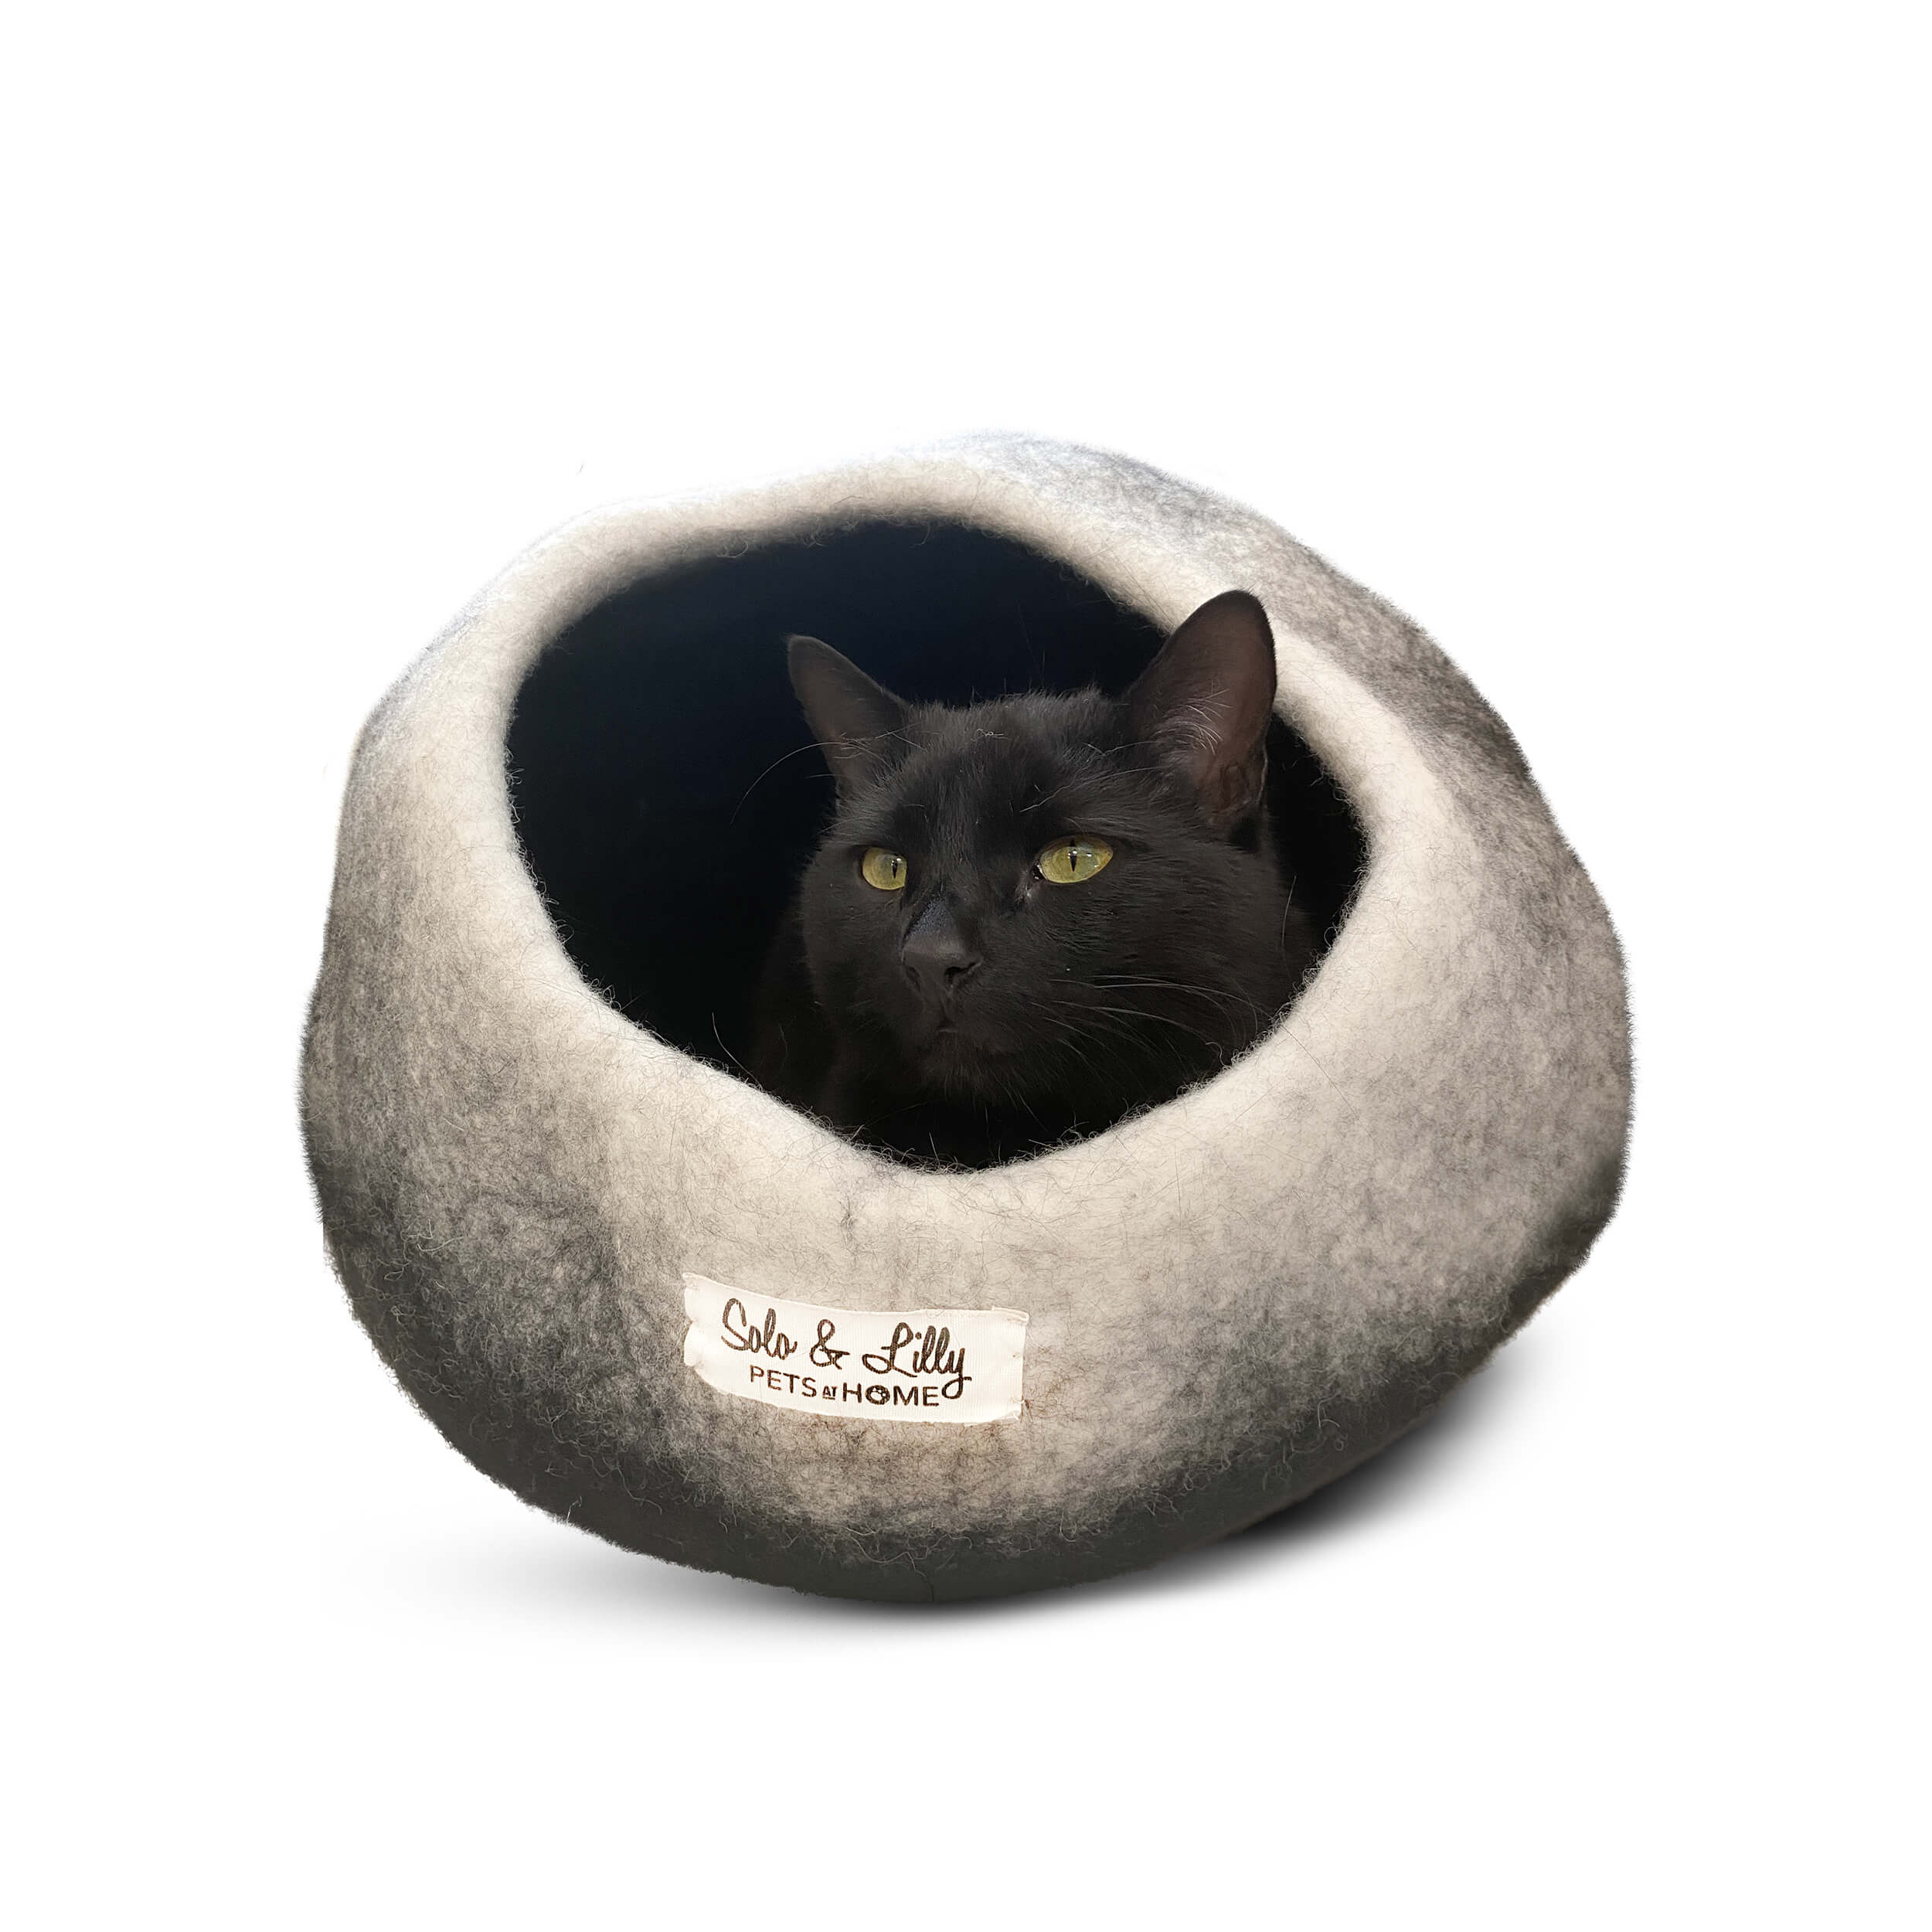 solo and lilly cat cave with cat inside black and white